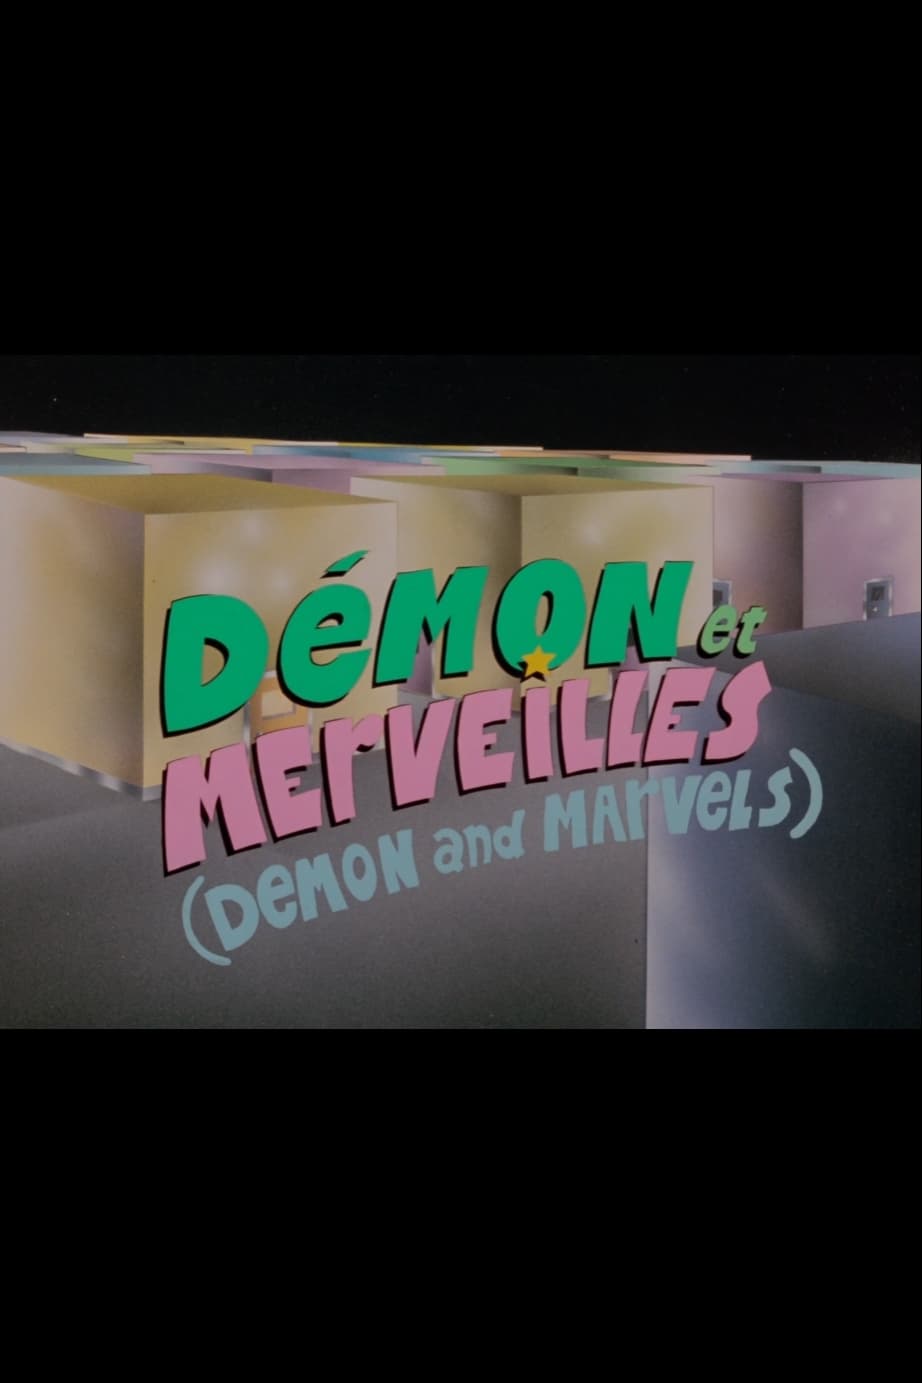 Demon and Marvels